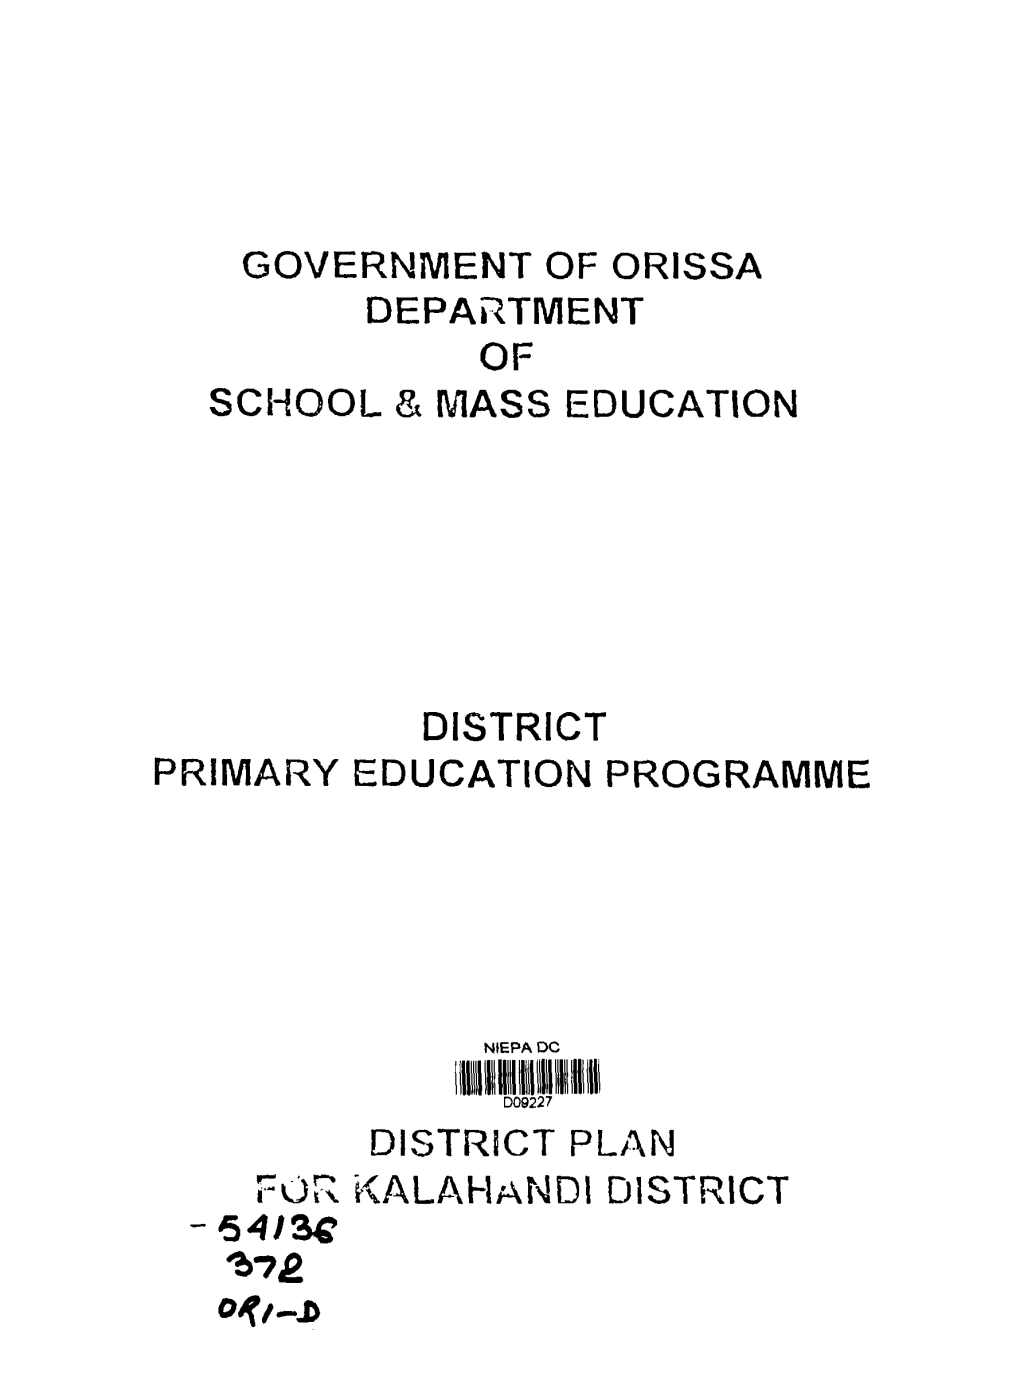 Governivient of Orissa Department of School & Mass Education District Primary Education Programme